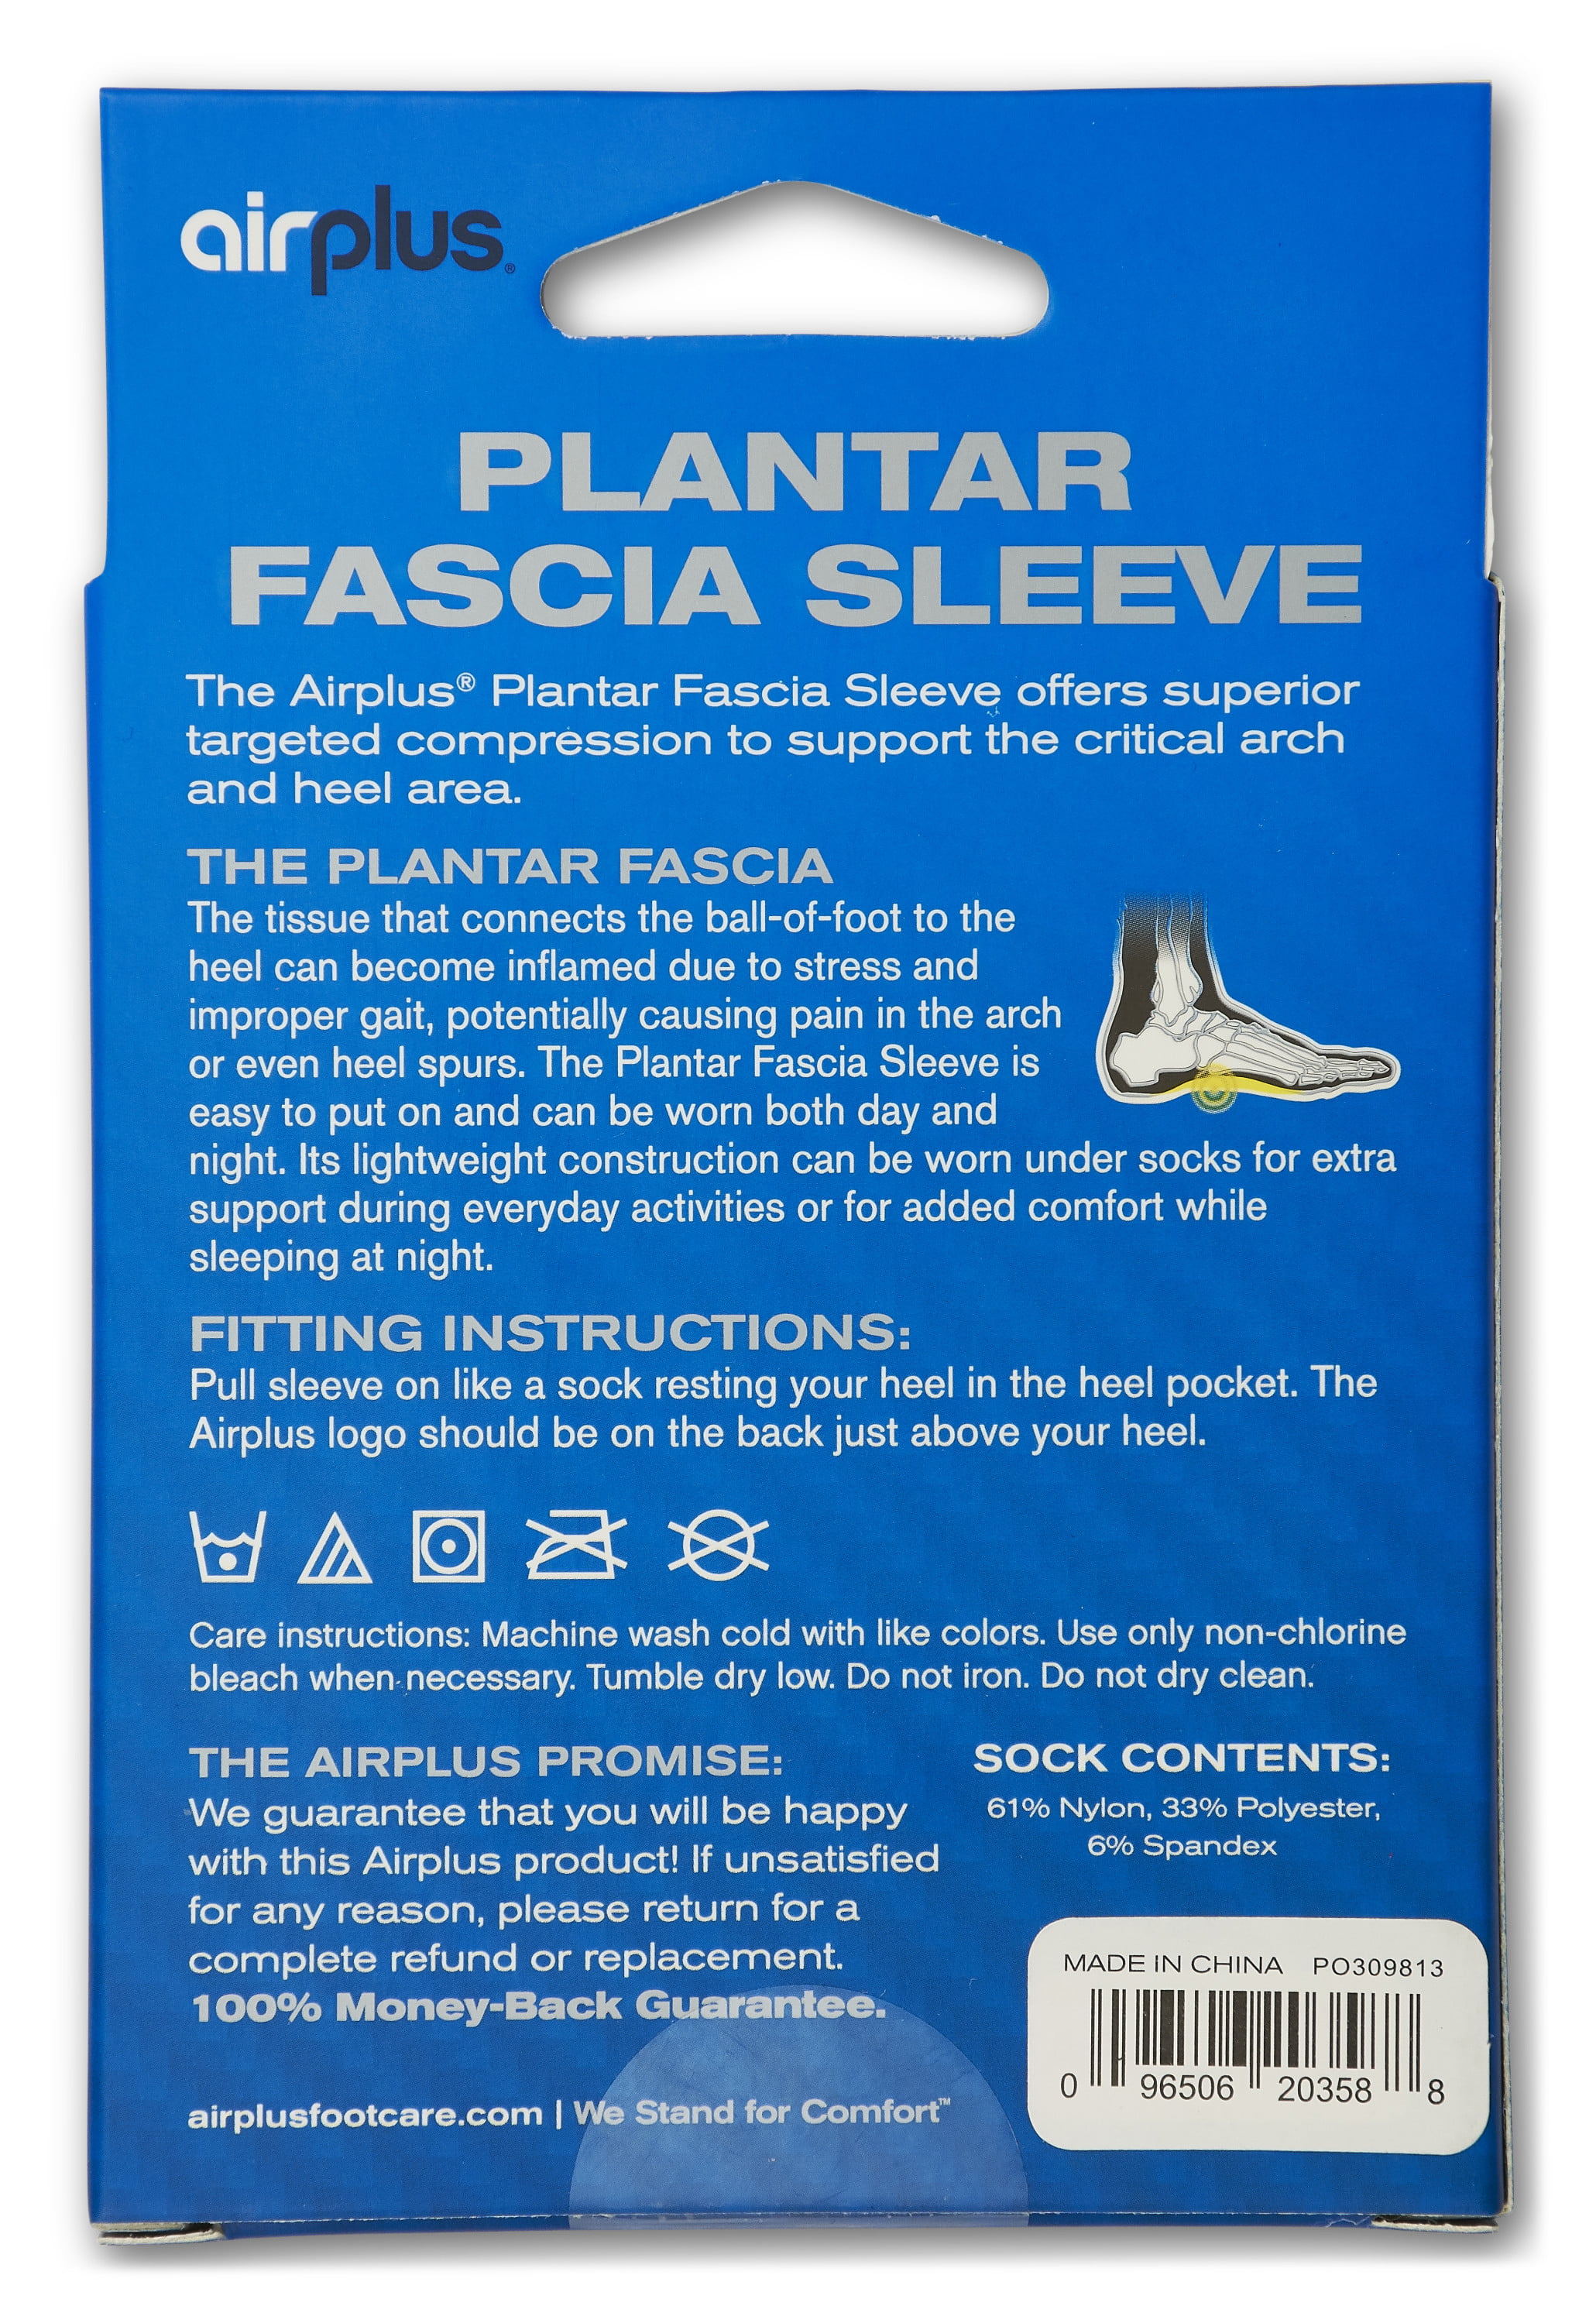 Airplus Plantar Fascia Sleeve Southcentre Mall, 52% OFF